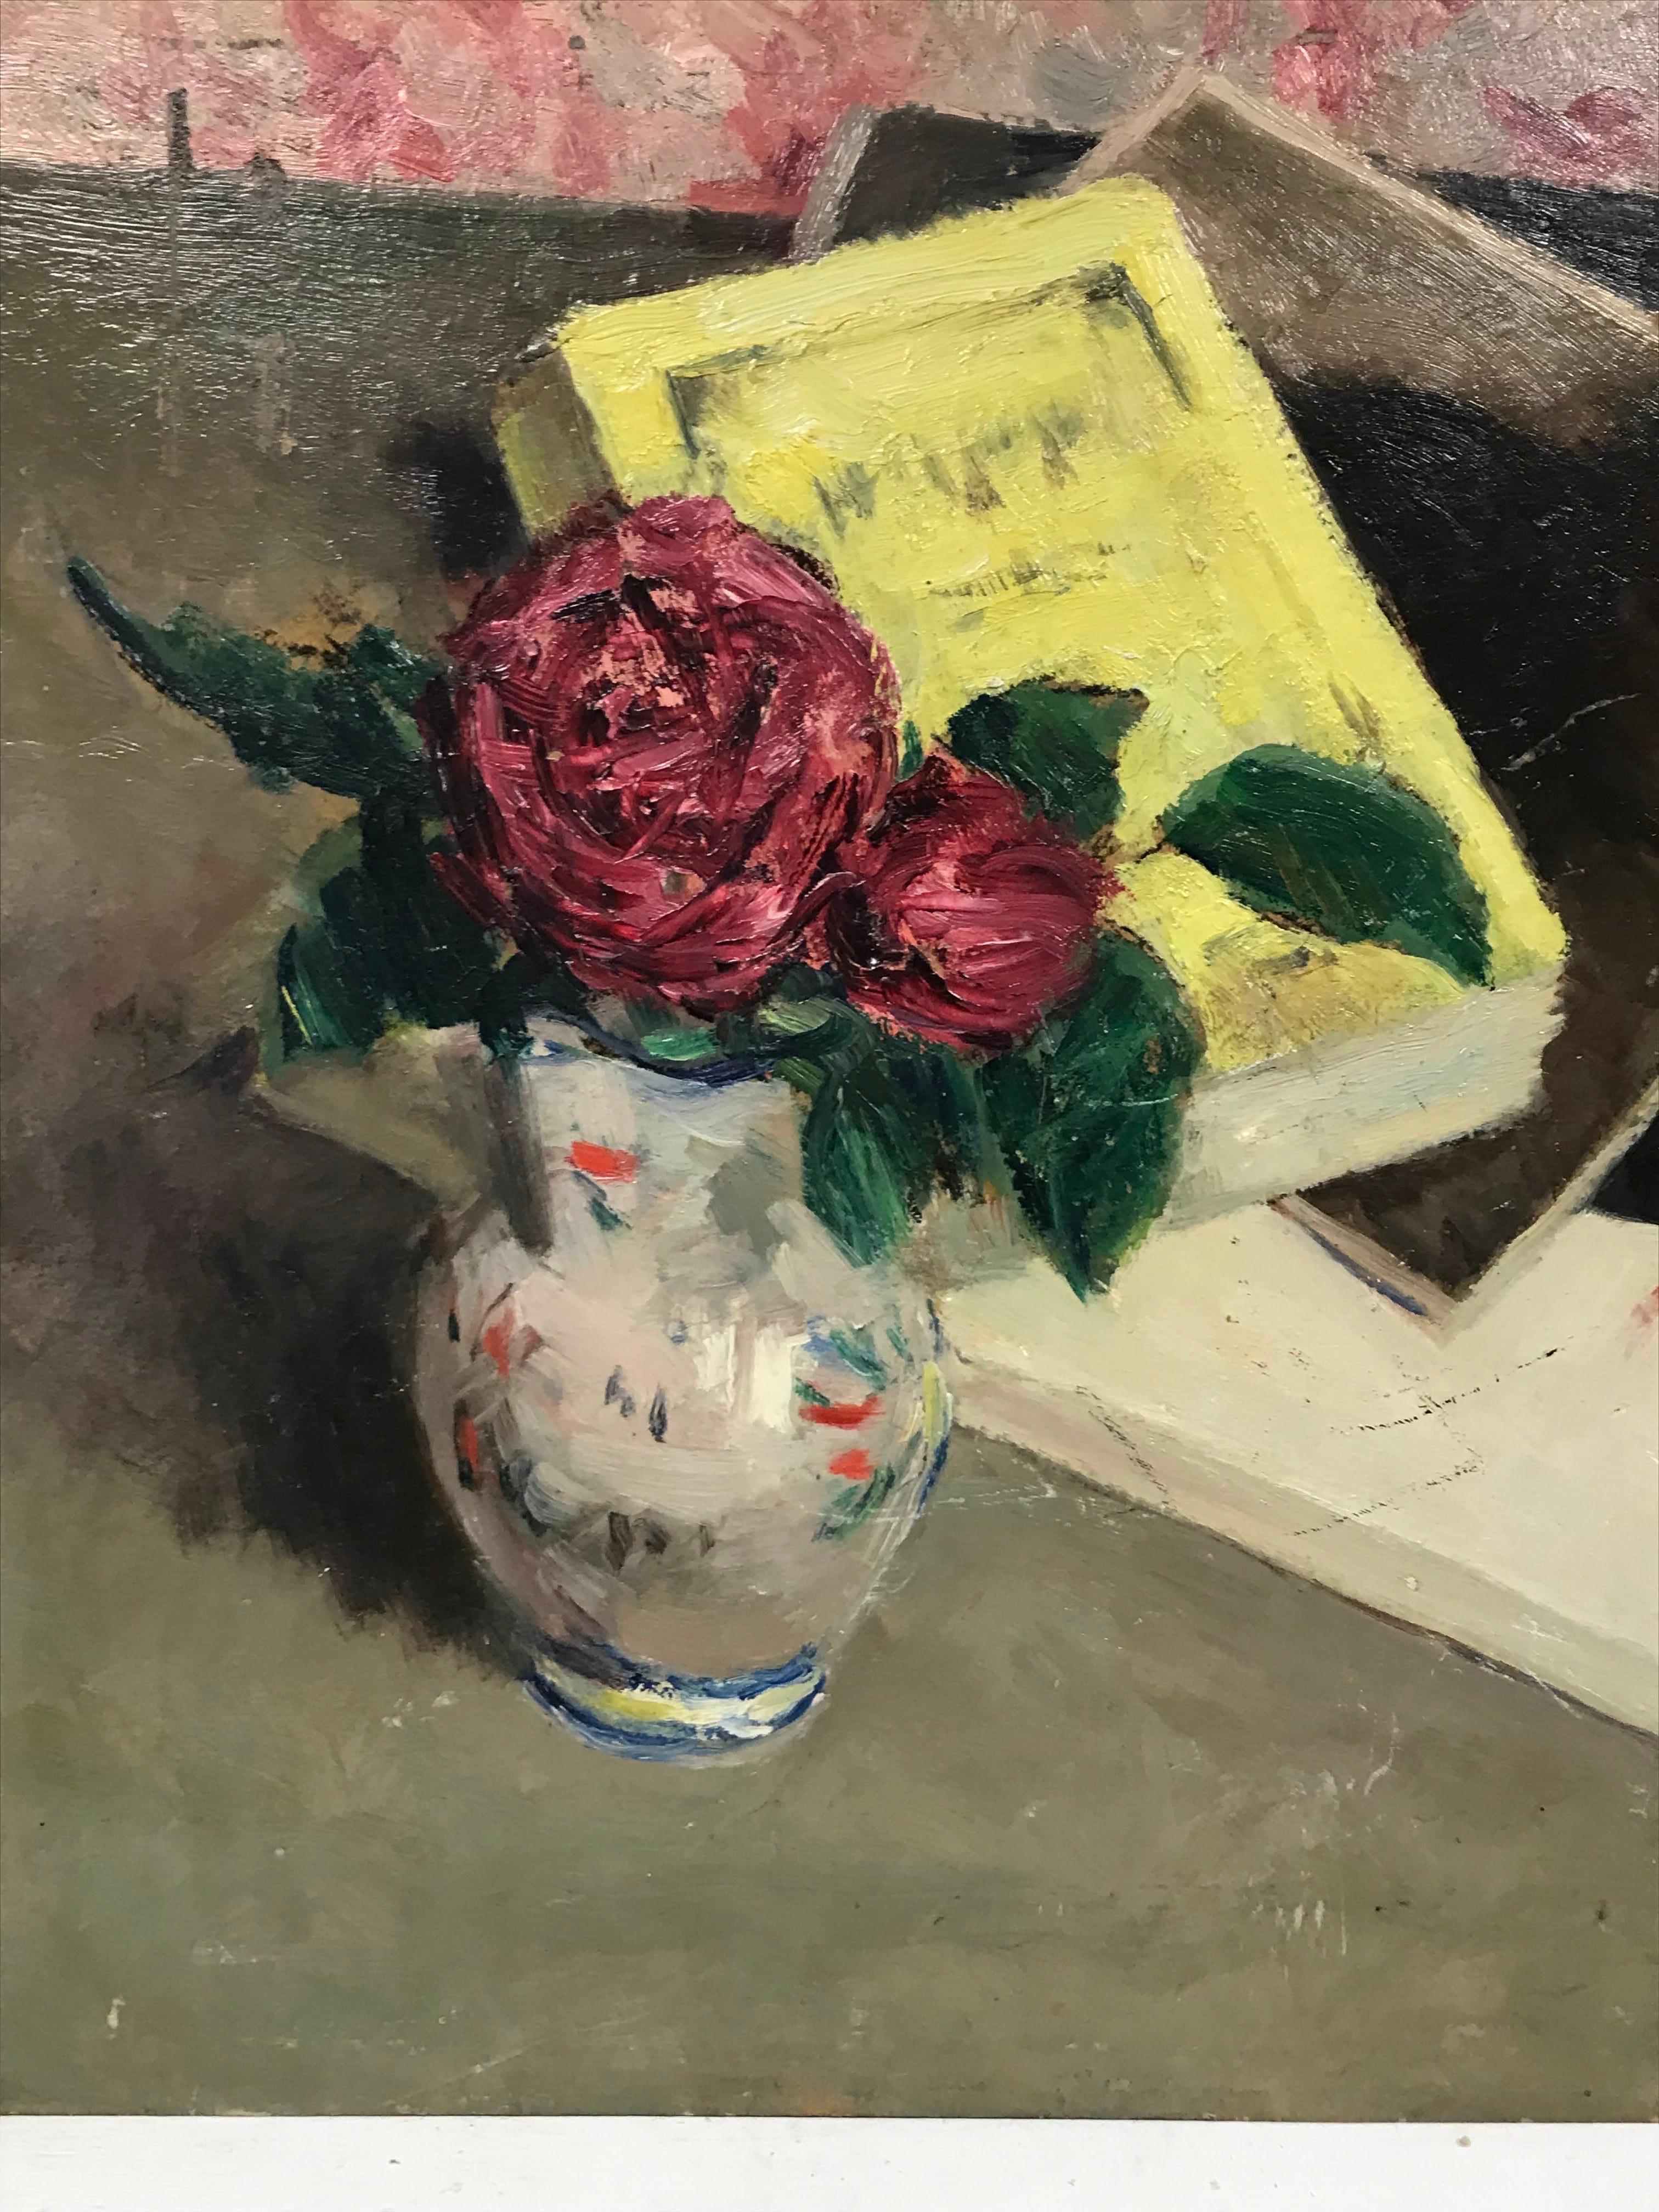 Artist/ School: French School, mid 20th century, indistinctly signed

Title: Still life of pink roses in a beautiful vase, against a backdrop of books (lovely yellow one) and pink coloured wallpaper patterns. 

Medium: oil painting on board,